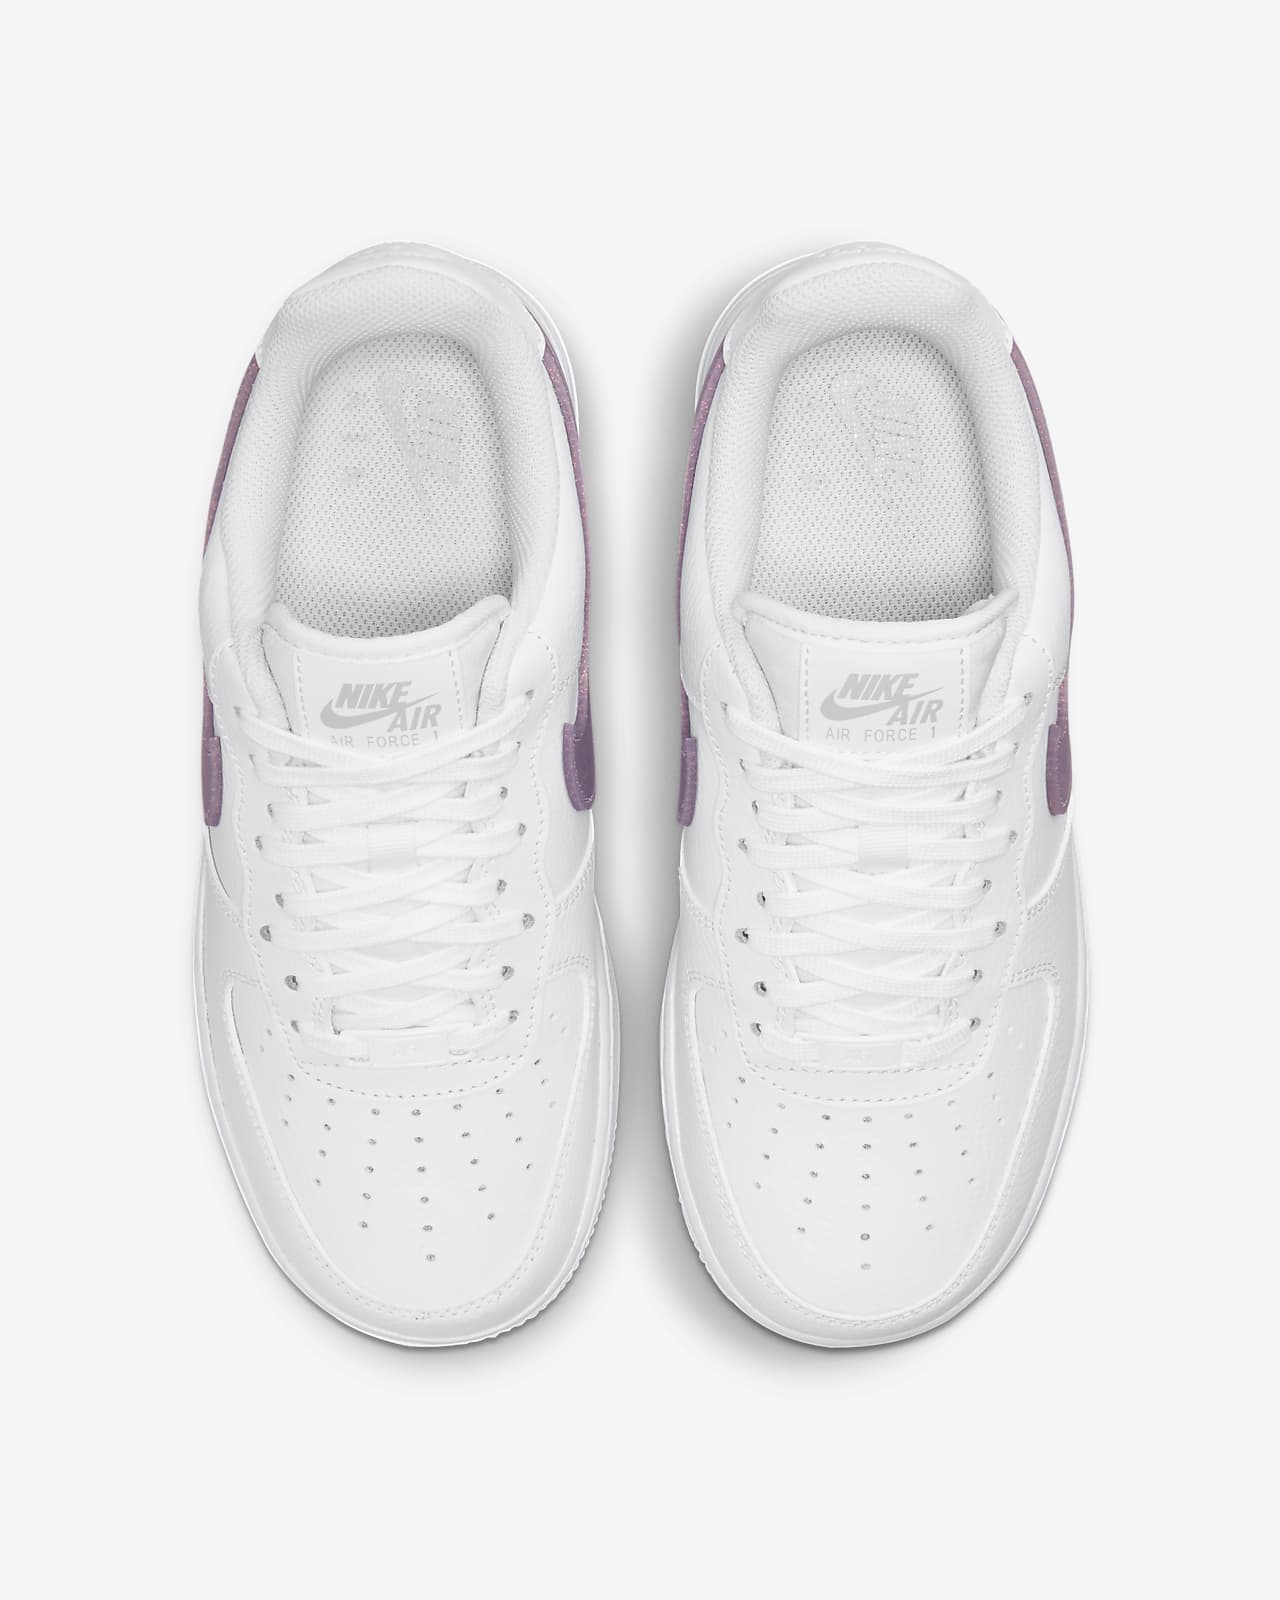 Nike Air Force 1 '07 Essential Women's Shoes